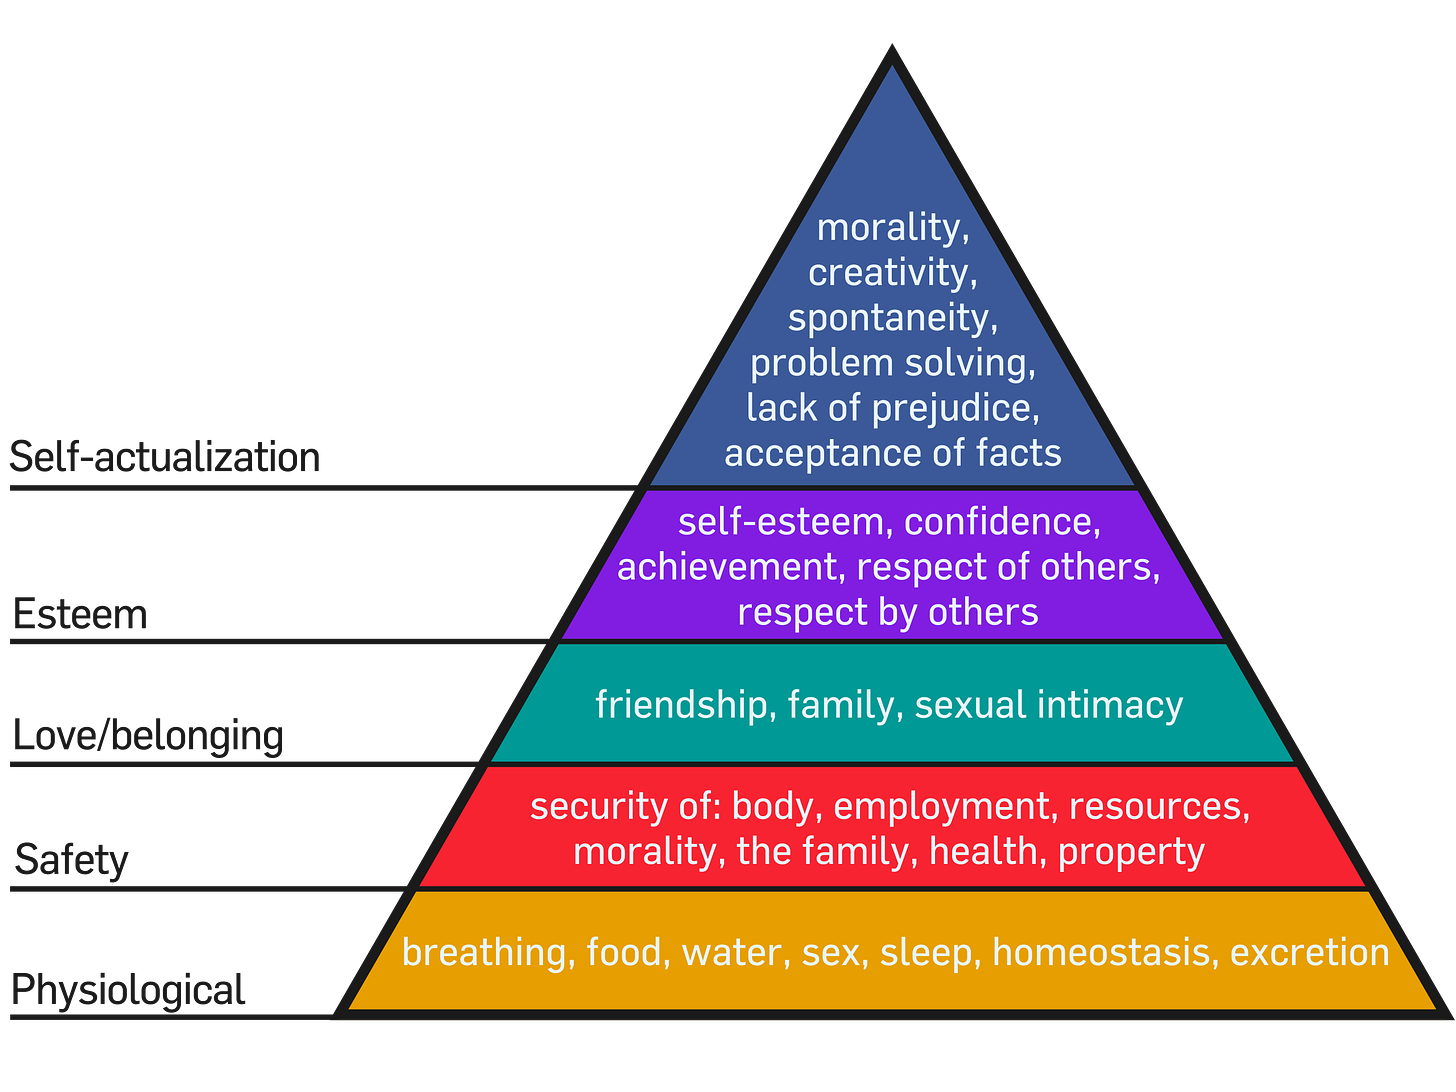 An interpretation of Maslow's hierarchy of needs, represented as a pyramid, with the more basic needs at the bottom